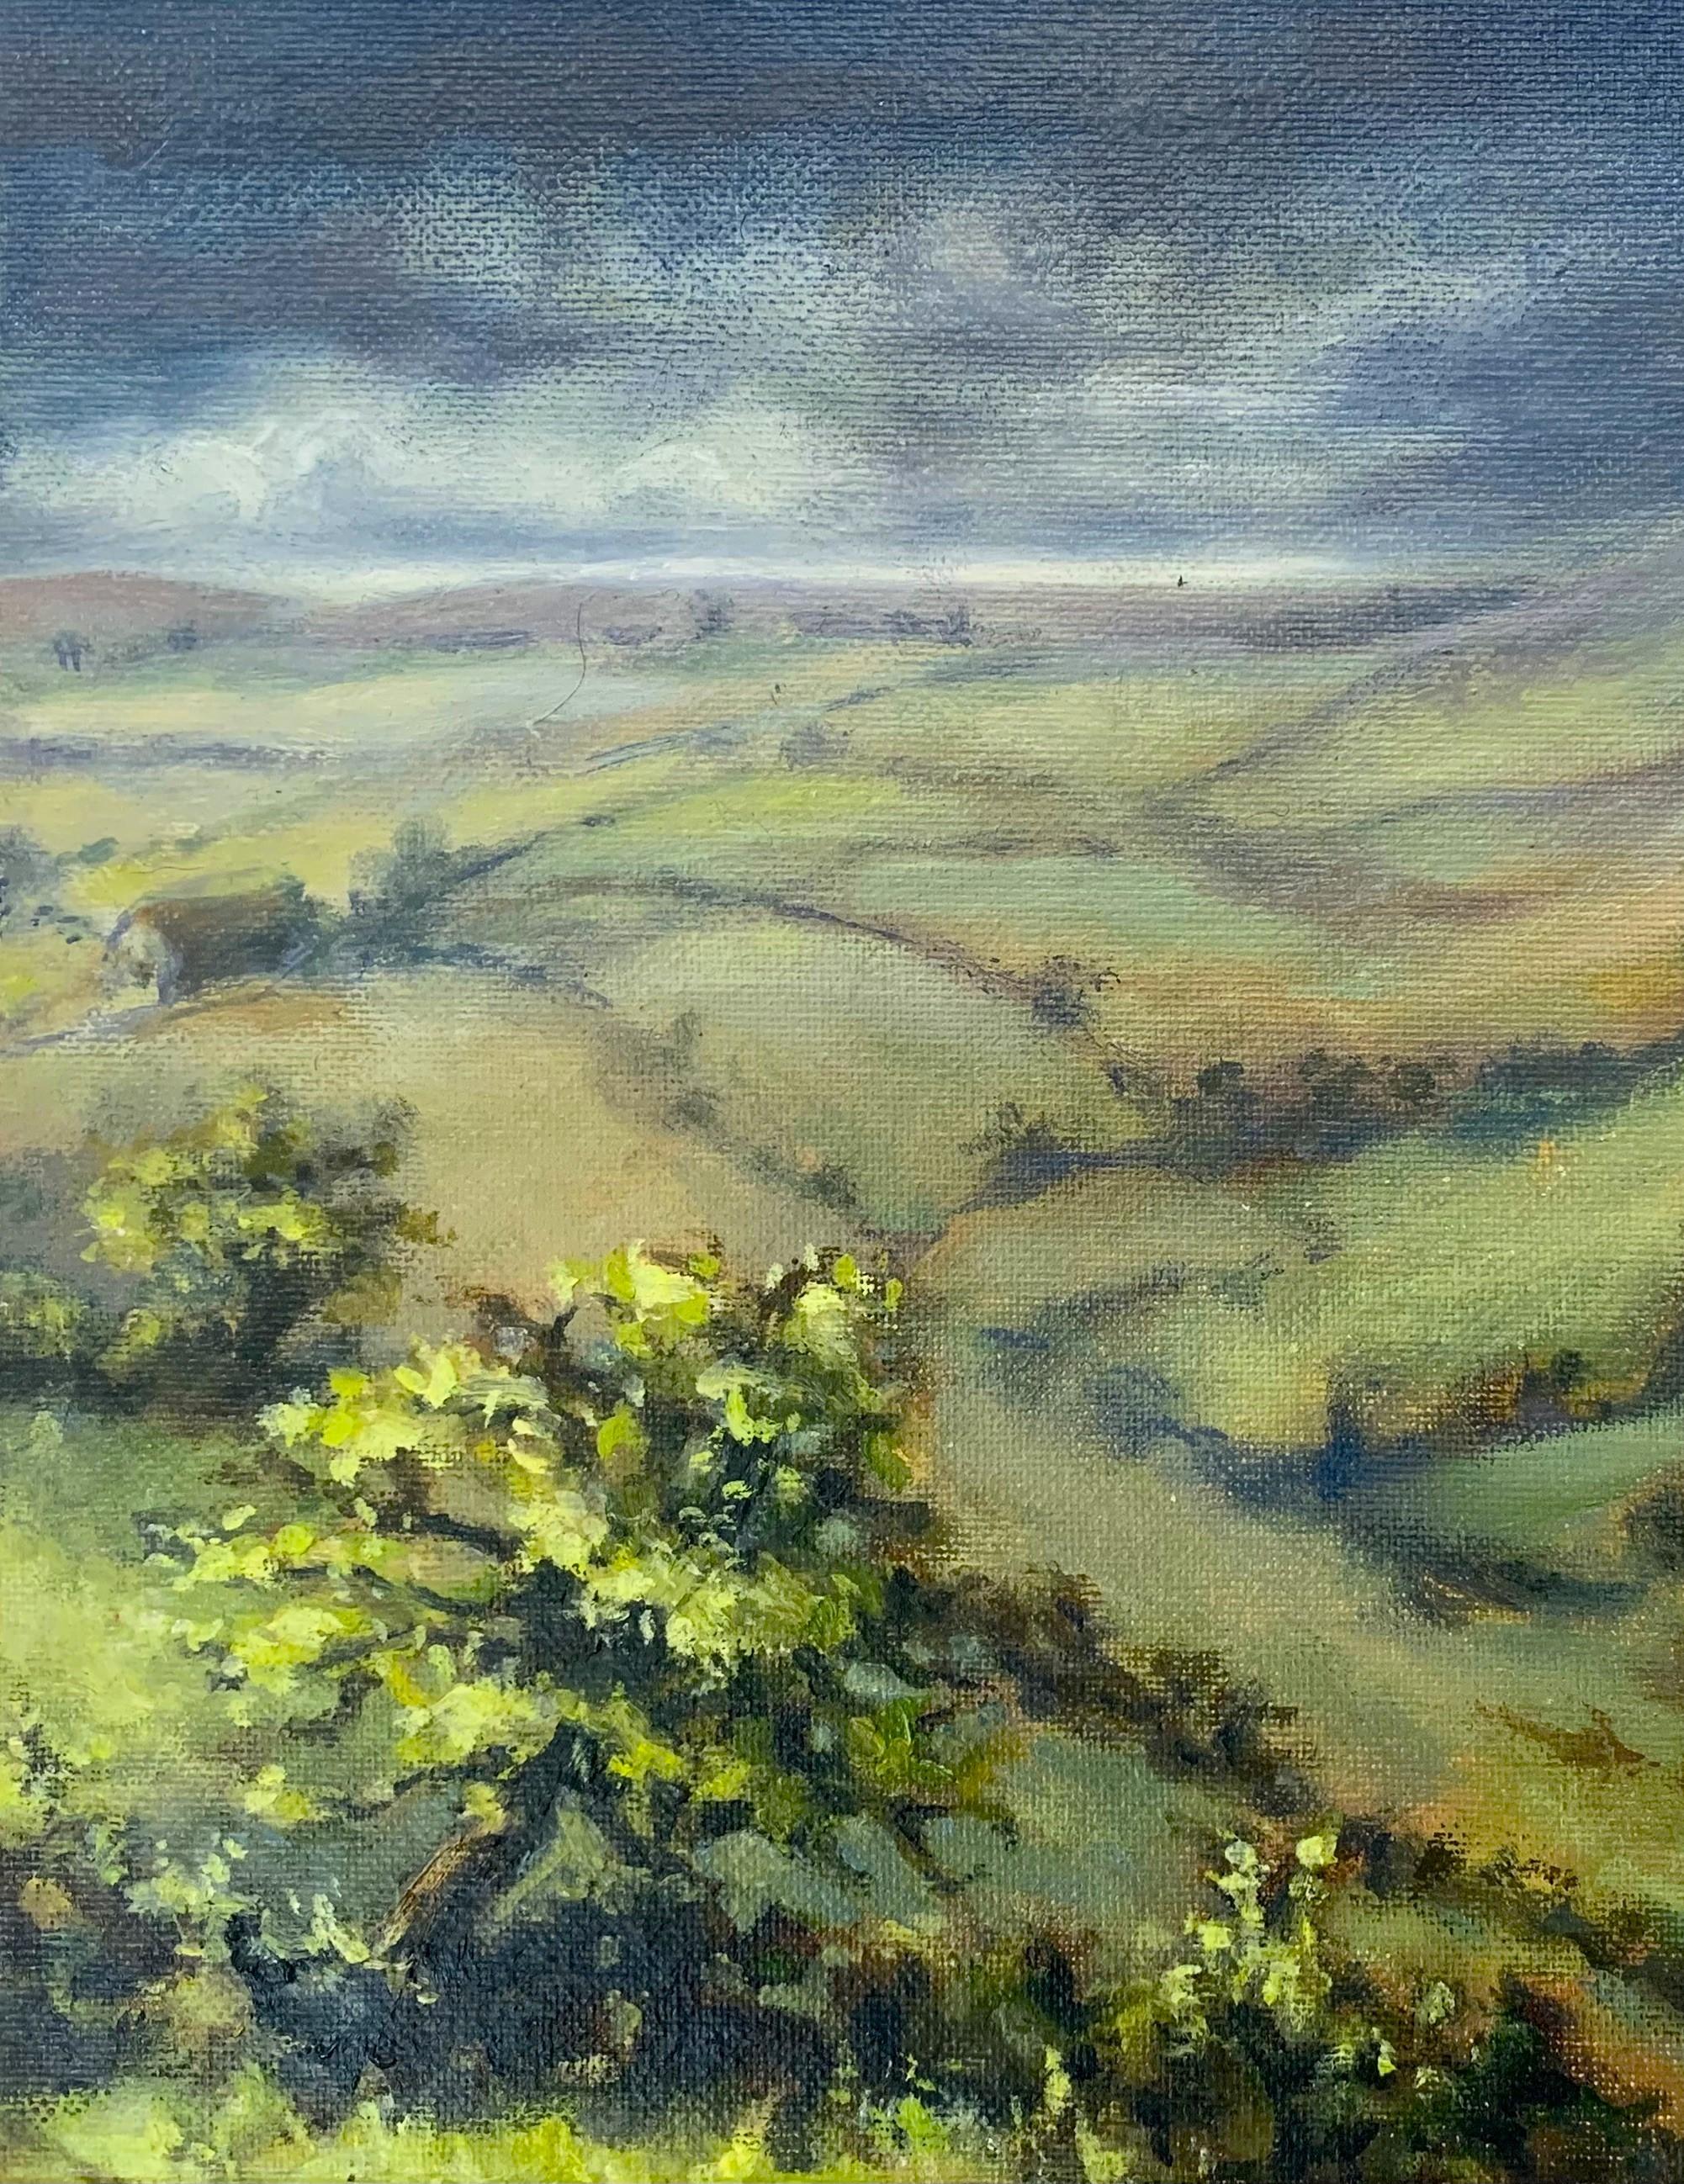 Keeping a weather eye on the wind direction, I watched the sunlight across the valley on the way to Cheltenham as the the rain storm moved across - it was stunning. The walk had opened up into a beautiful, soft, almost fabric vista.

Additional